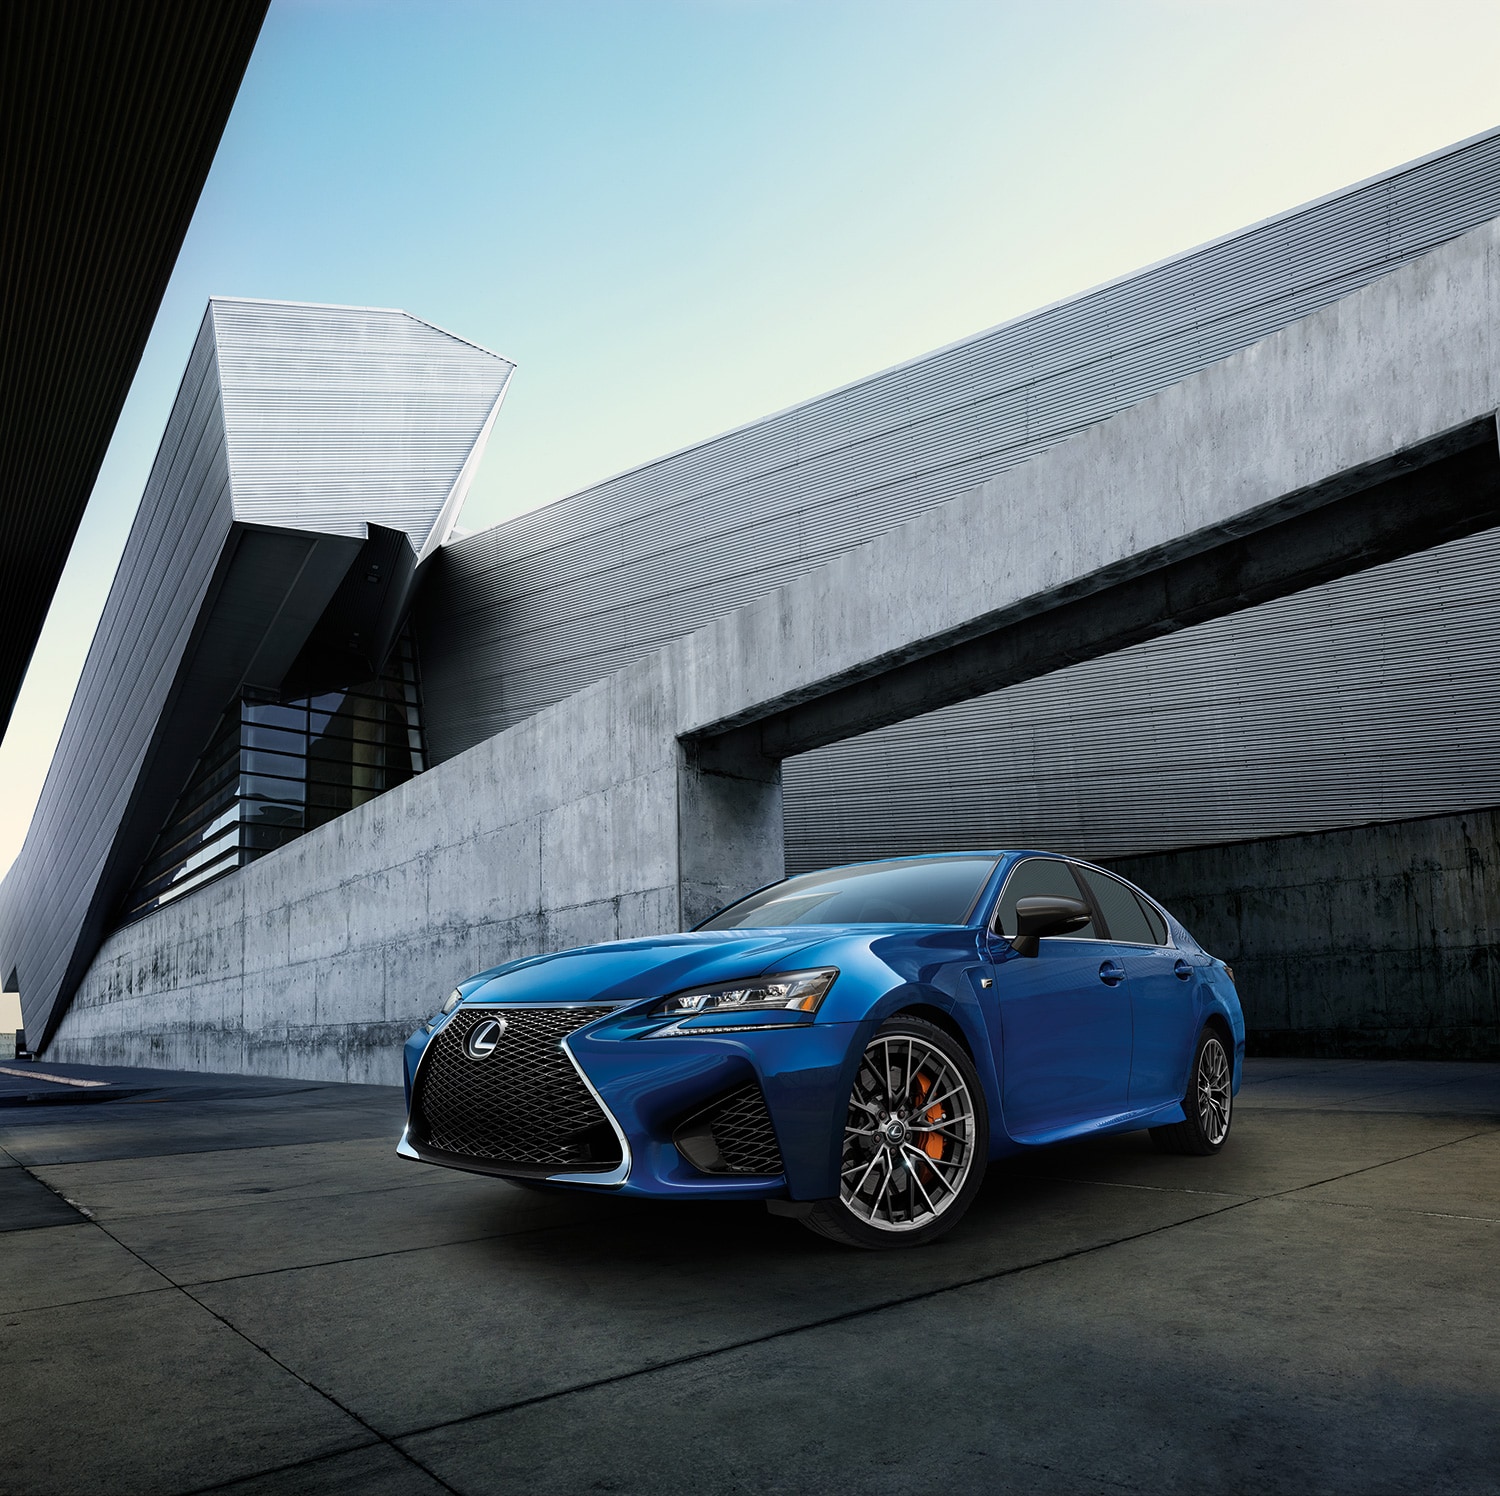 Model features of the 2020 Lexus GS and GS F Sport at Bobby Rahal Lexus of Lewistown | Blue Lexus GS F parked on road